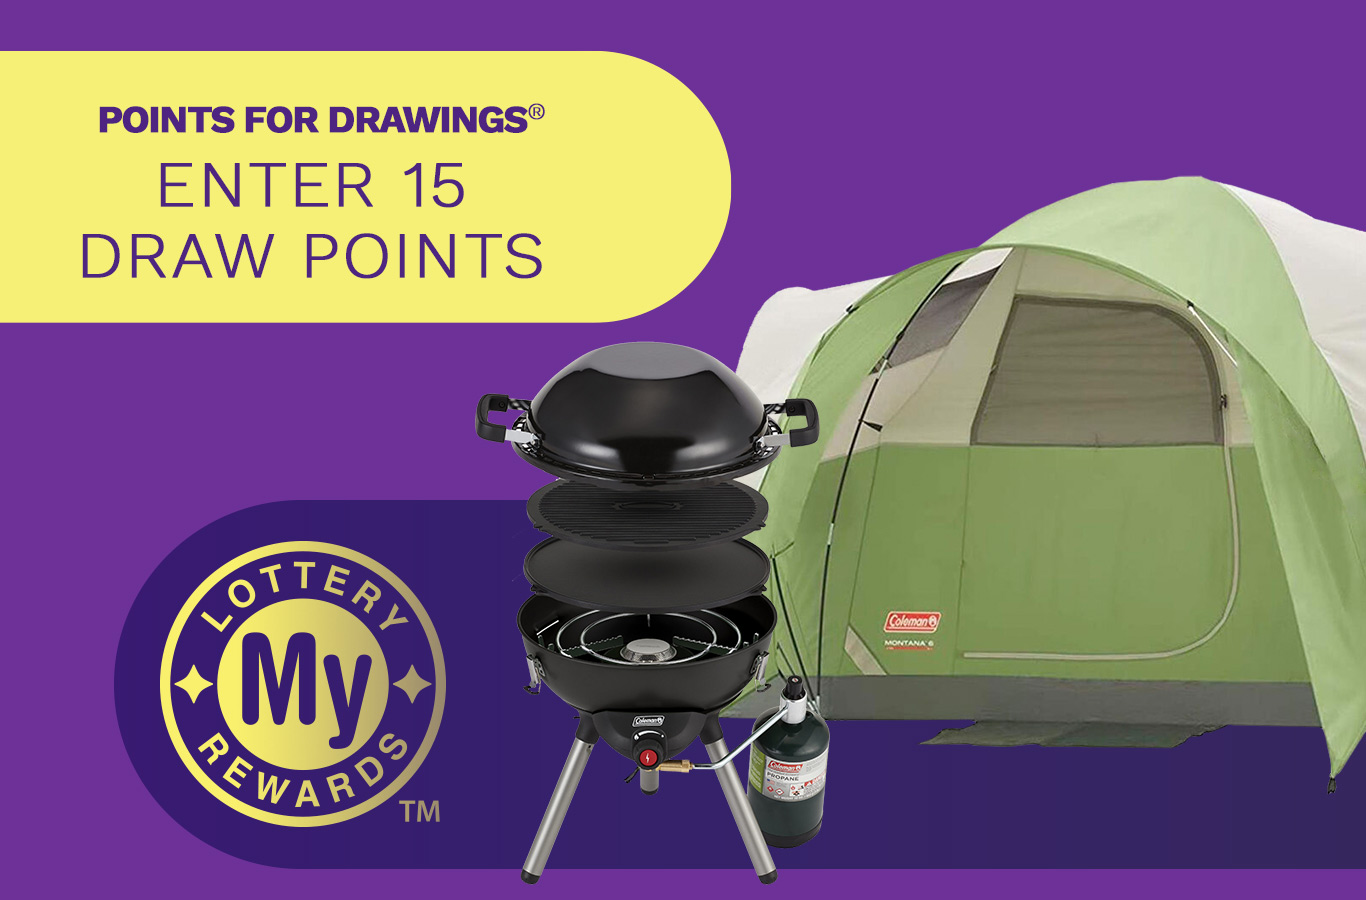 Here's your chance to win a Coleman® Camping Package! Enter by Monday, March 4th.